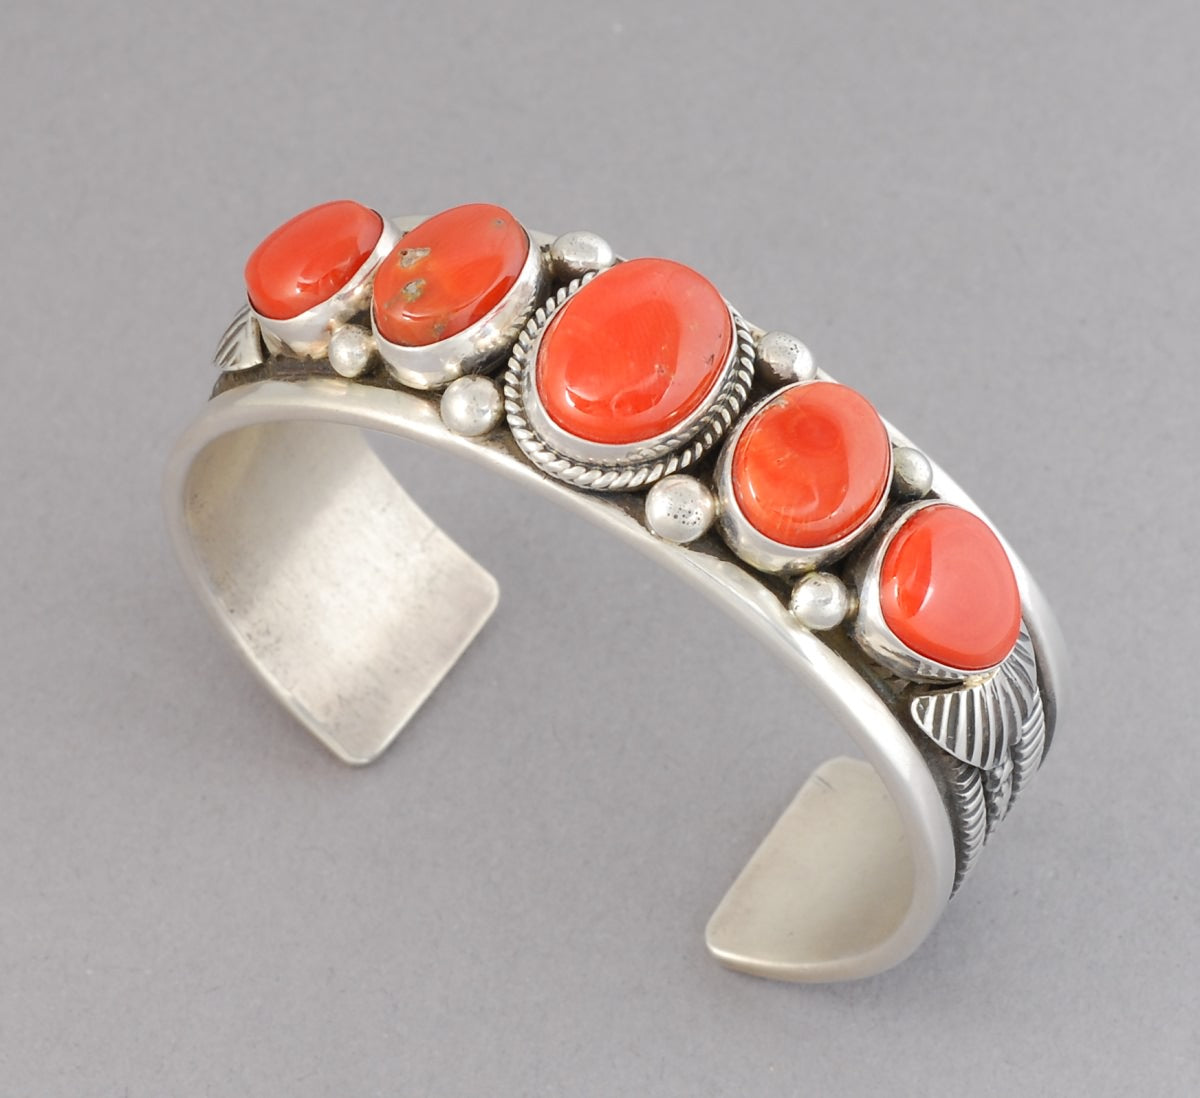 Cuff Bracelet with Red Coral by Guy Hoskie